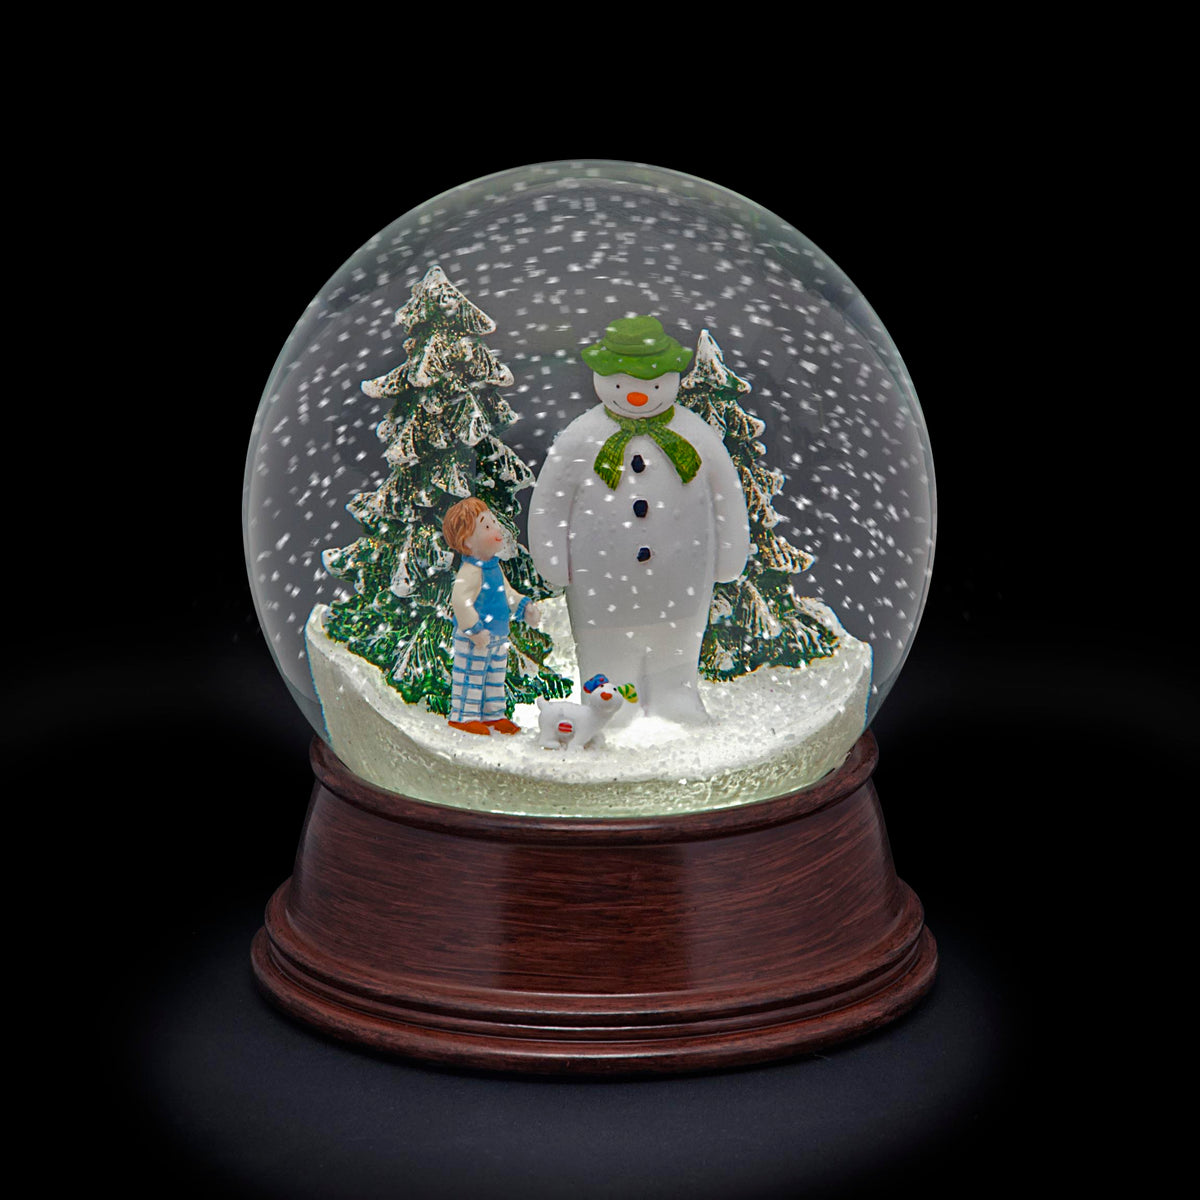 19cm Snowman & Snowdog Christmas Musical Snow Globe with Colour Changing LEDs